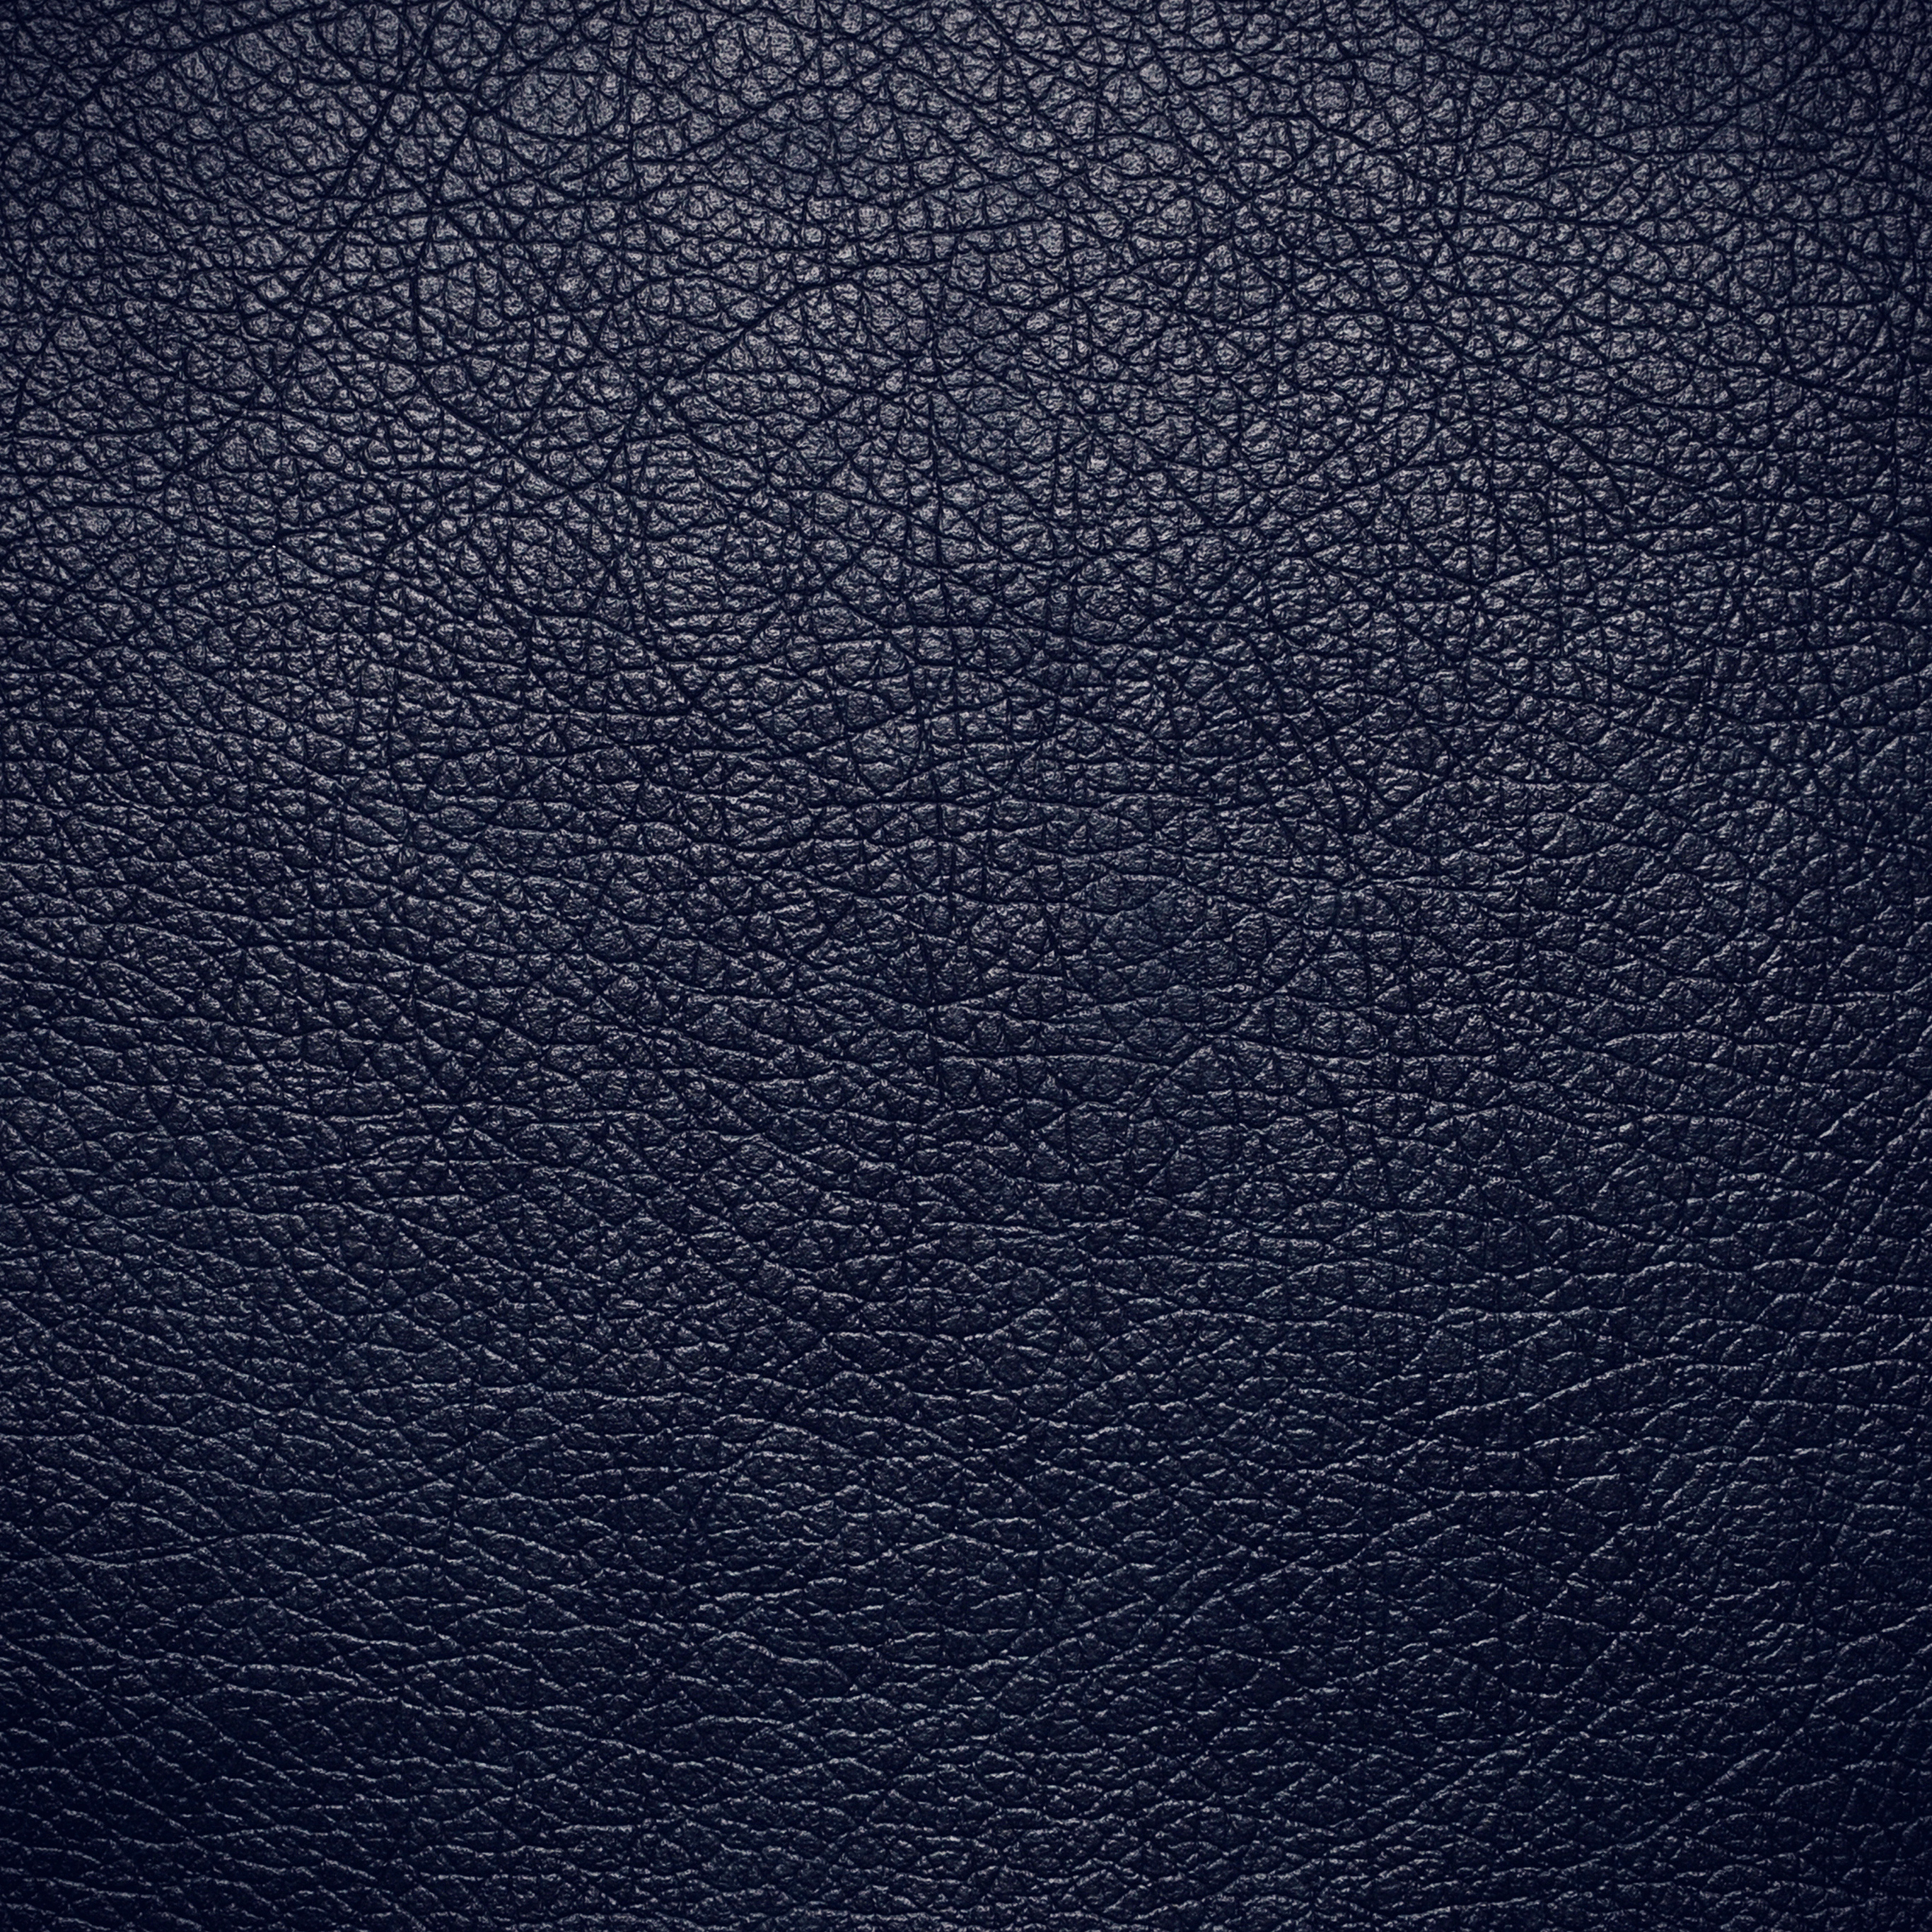 I Love Papers | vi30-texture-skin-blue-dark-leather-pattern